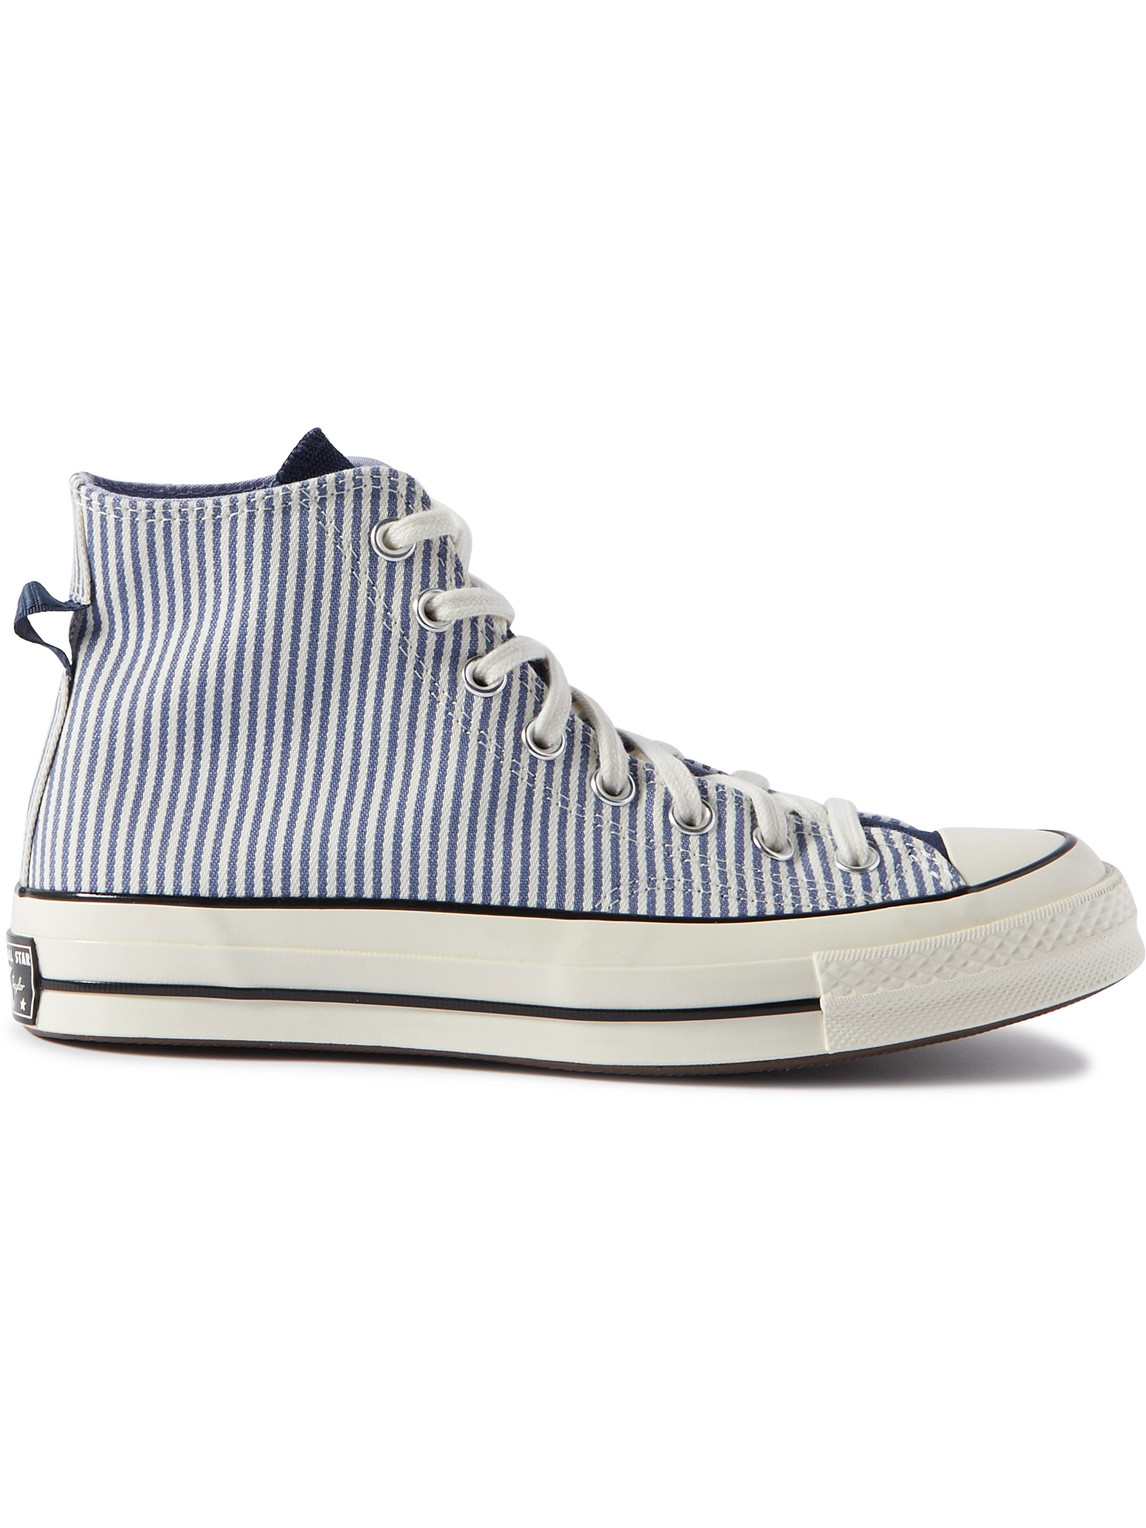 Converse Chuck 70 Striped Canvas High-Top Sneakers